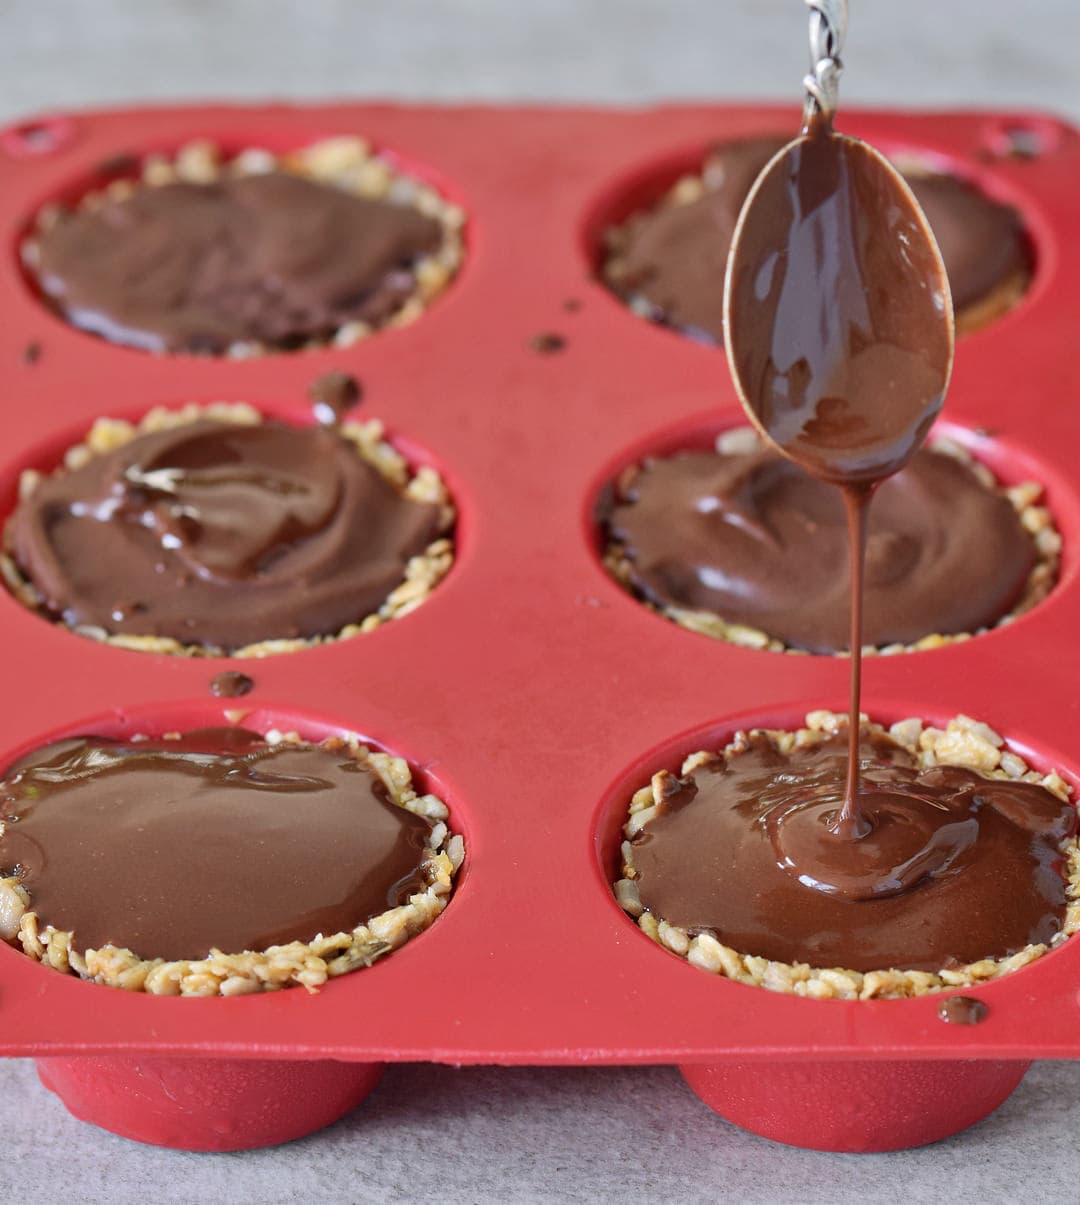 melted chocolate sauce drizzled over muesli cups